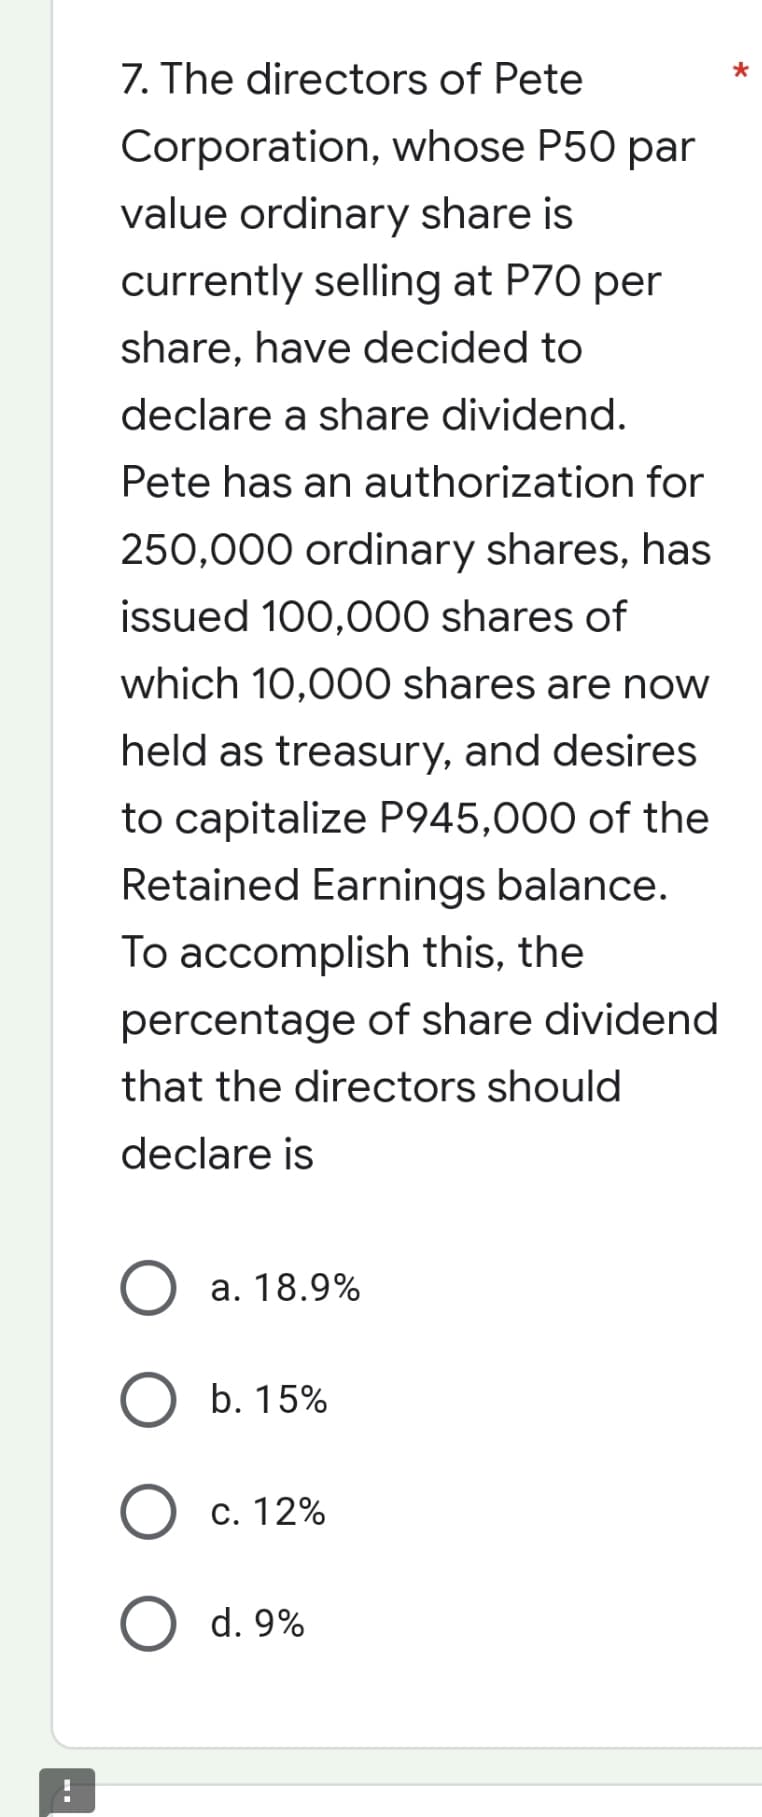 7. The directors of Pete
Corporation, whose P50 par
value ordinary share is
currently selling at P70 per
share, have decided to
declare a share dividend.
Pete has an authorization for
250,000 ordinary shares, has
issued 100,000 shares of
which 10,000 shares are now
held as treasury, and desires
to capitalize P945,000 of the
Retained Earnings balance.
To accomplish this, the
percentage of share dividend
that the directors should
declare is
a. 18.9%
O b. 15%
c. 12%
O d. 9%